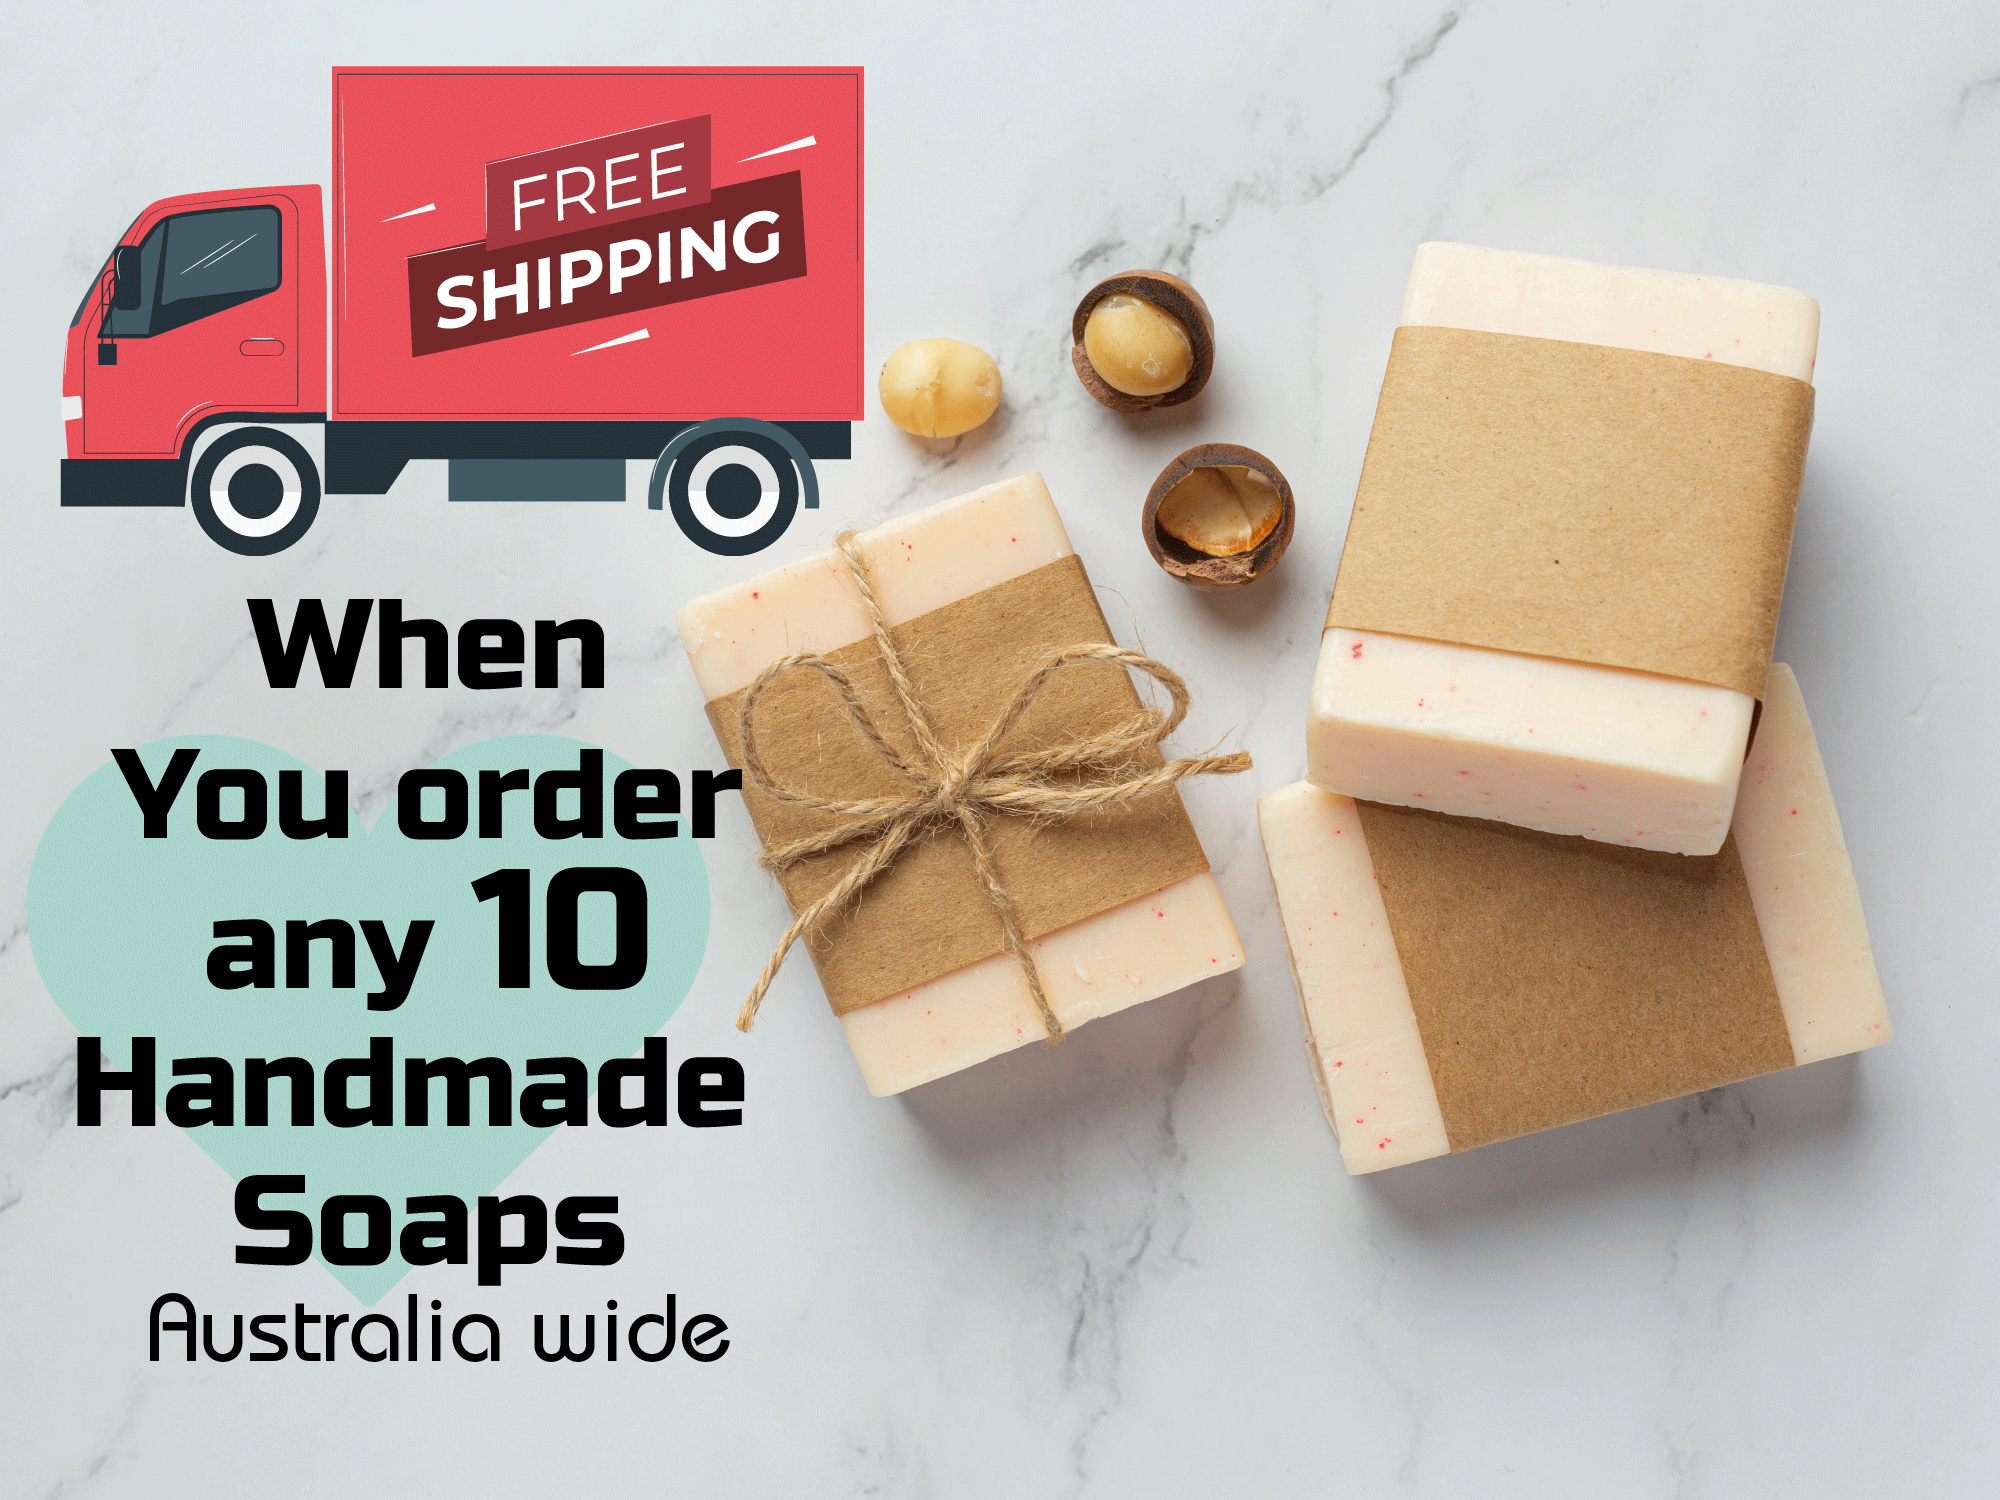 FREE Shipping offer